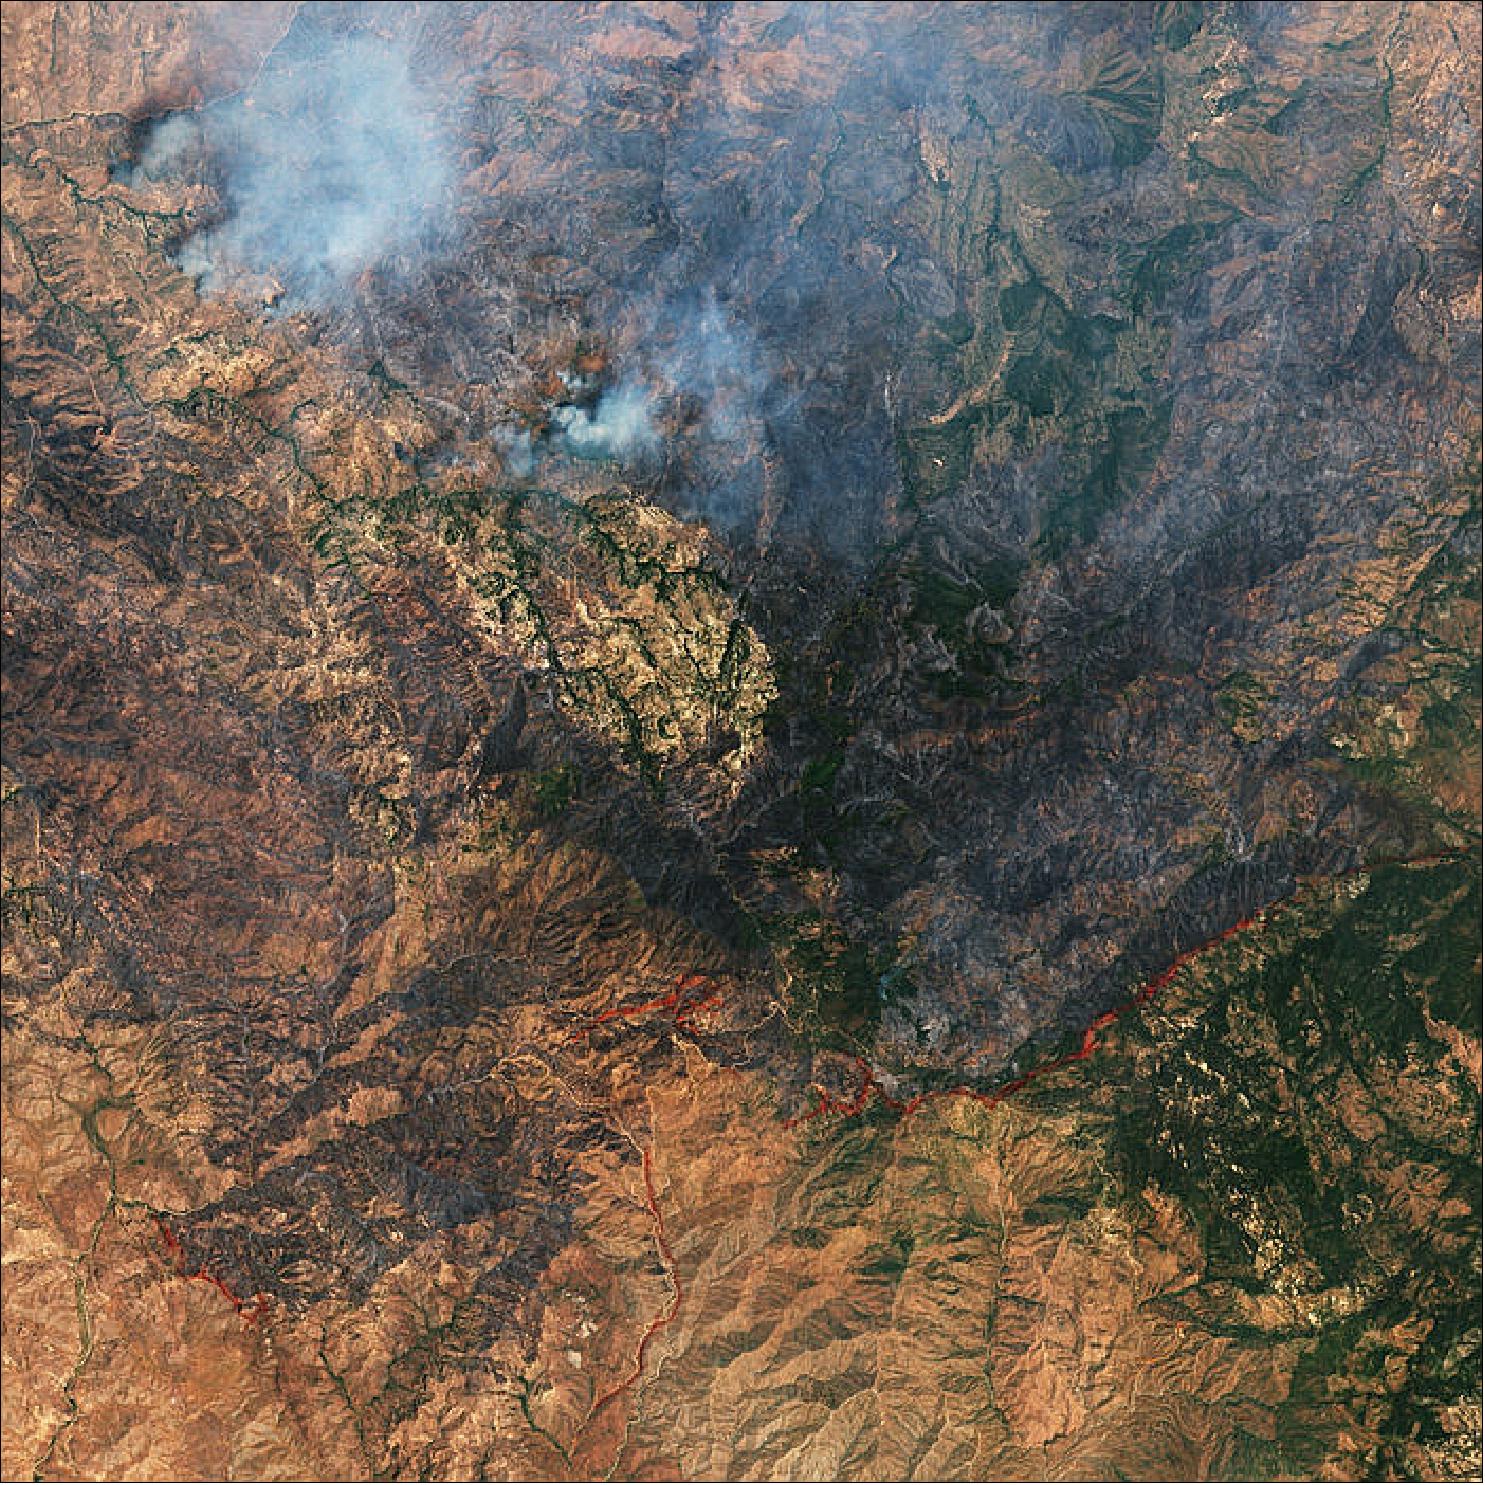 Figure 25: This Copernicus Sentinel-2 image from 24 June not only captures the extent of the Woodbury fire and burn scars in Arizona, but also the red lines of the retardant (image credit: ESA, the image contains modified Copernicus Sentinel data (2019), processed by ESA, CC BY-SA 3.0 IGO)